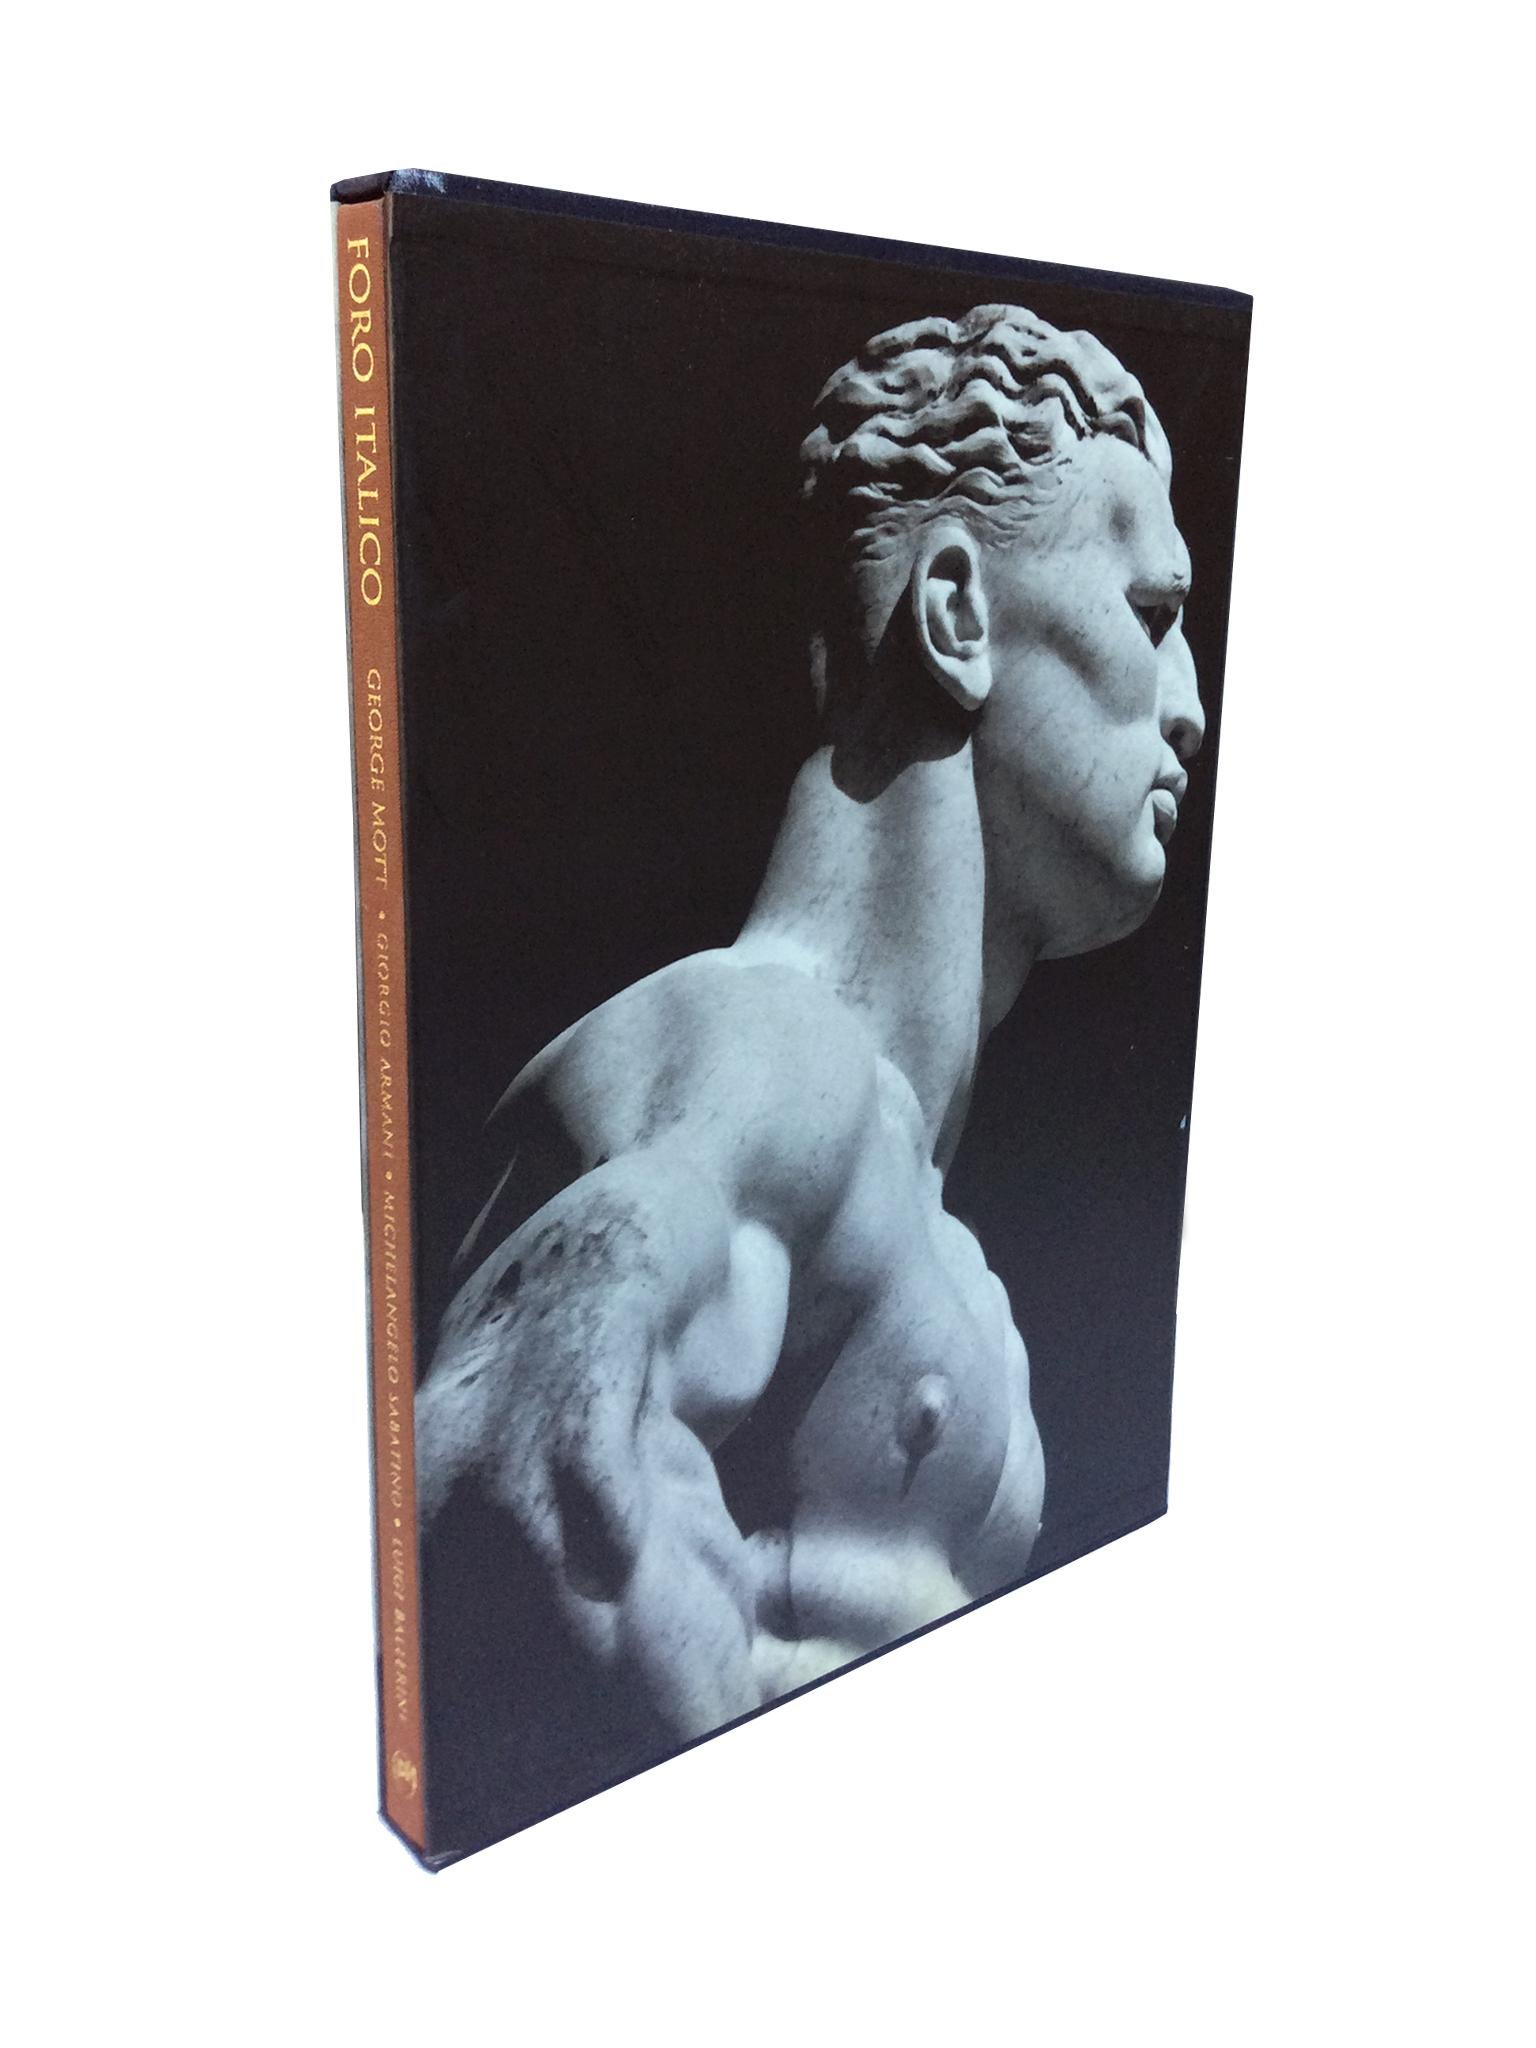 Hardbound book collecting black-and-white and color photographs by George Mott. They portray the 60 marbles statues at the sports complex Foro Italico in Rome, Italy. The Foro Italico hosted the Olympics in 1960. The statues' fraught beginnings